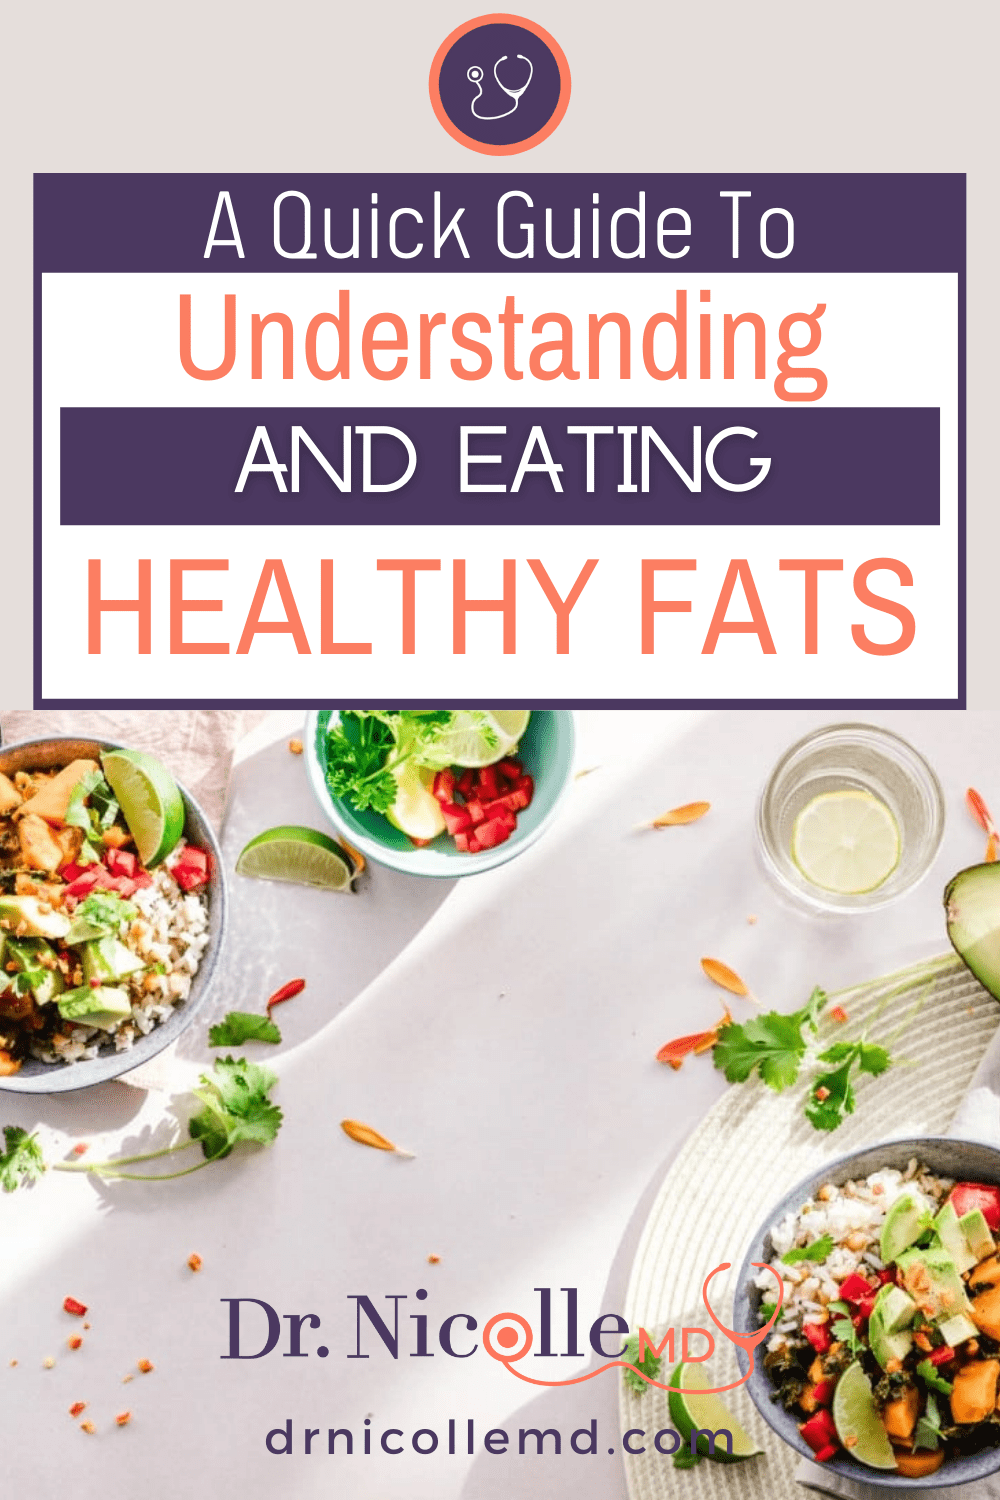 eating healthy fats, A Quick Guide to Understanding and Eating Healthy Fats, Dr. Nicolle